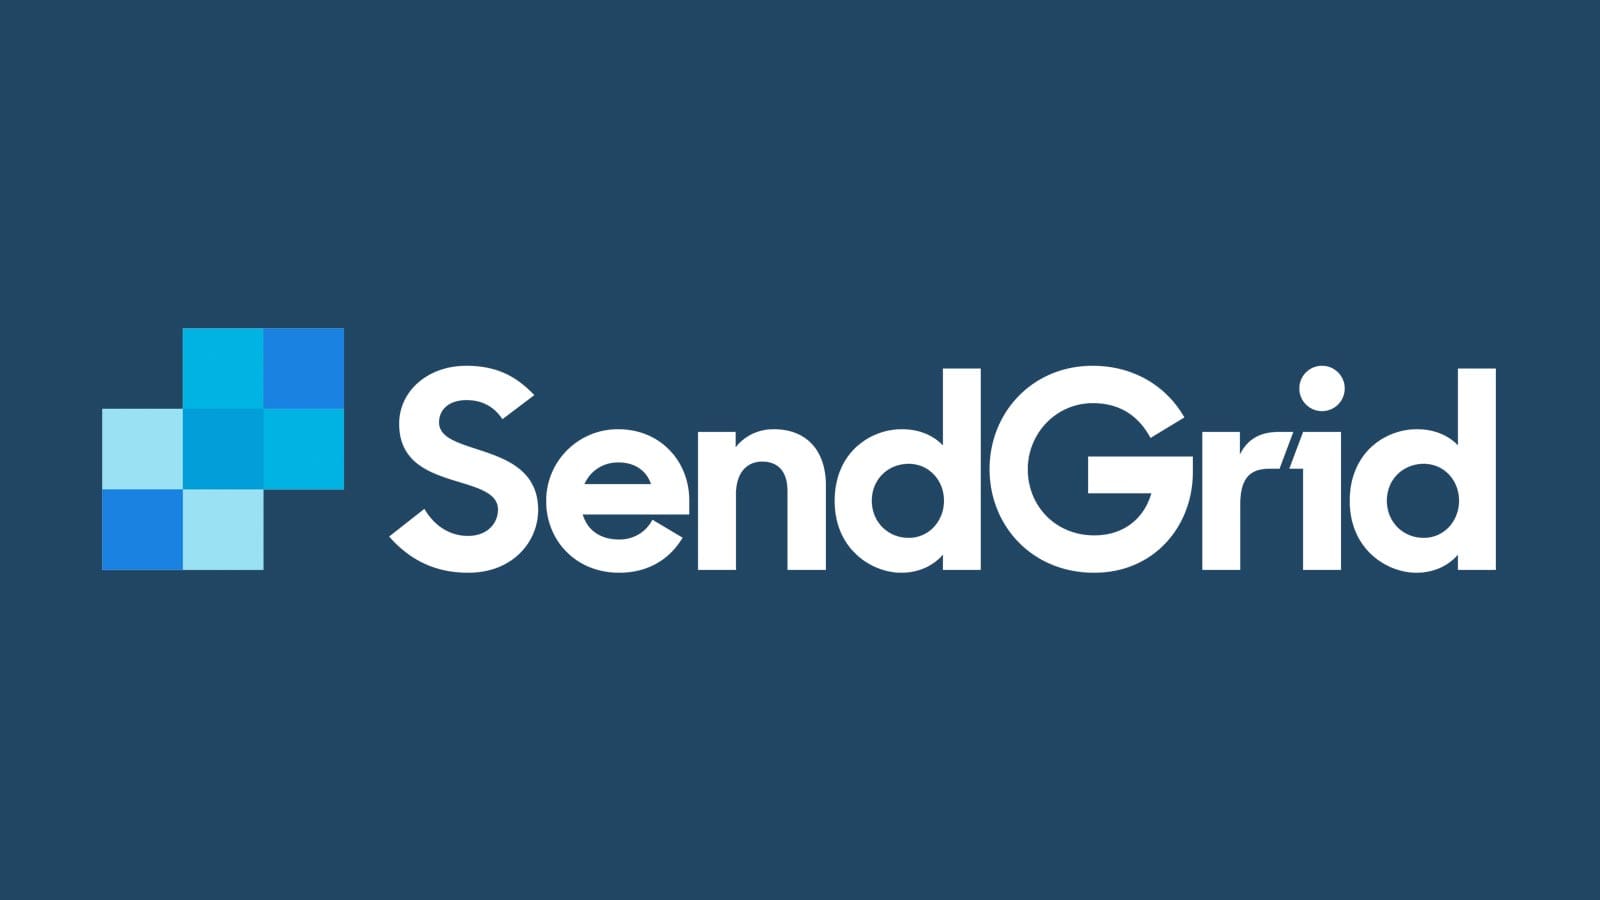 How to use custom HTML email templates with SendGrid